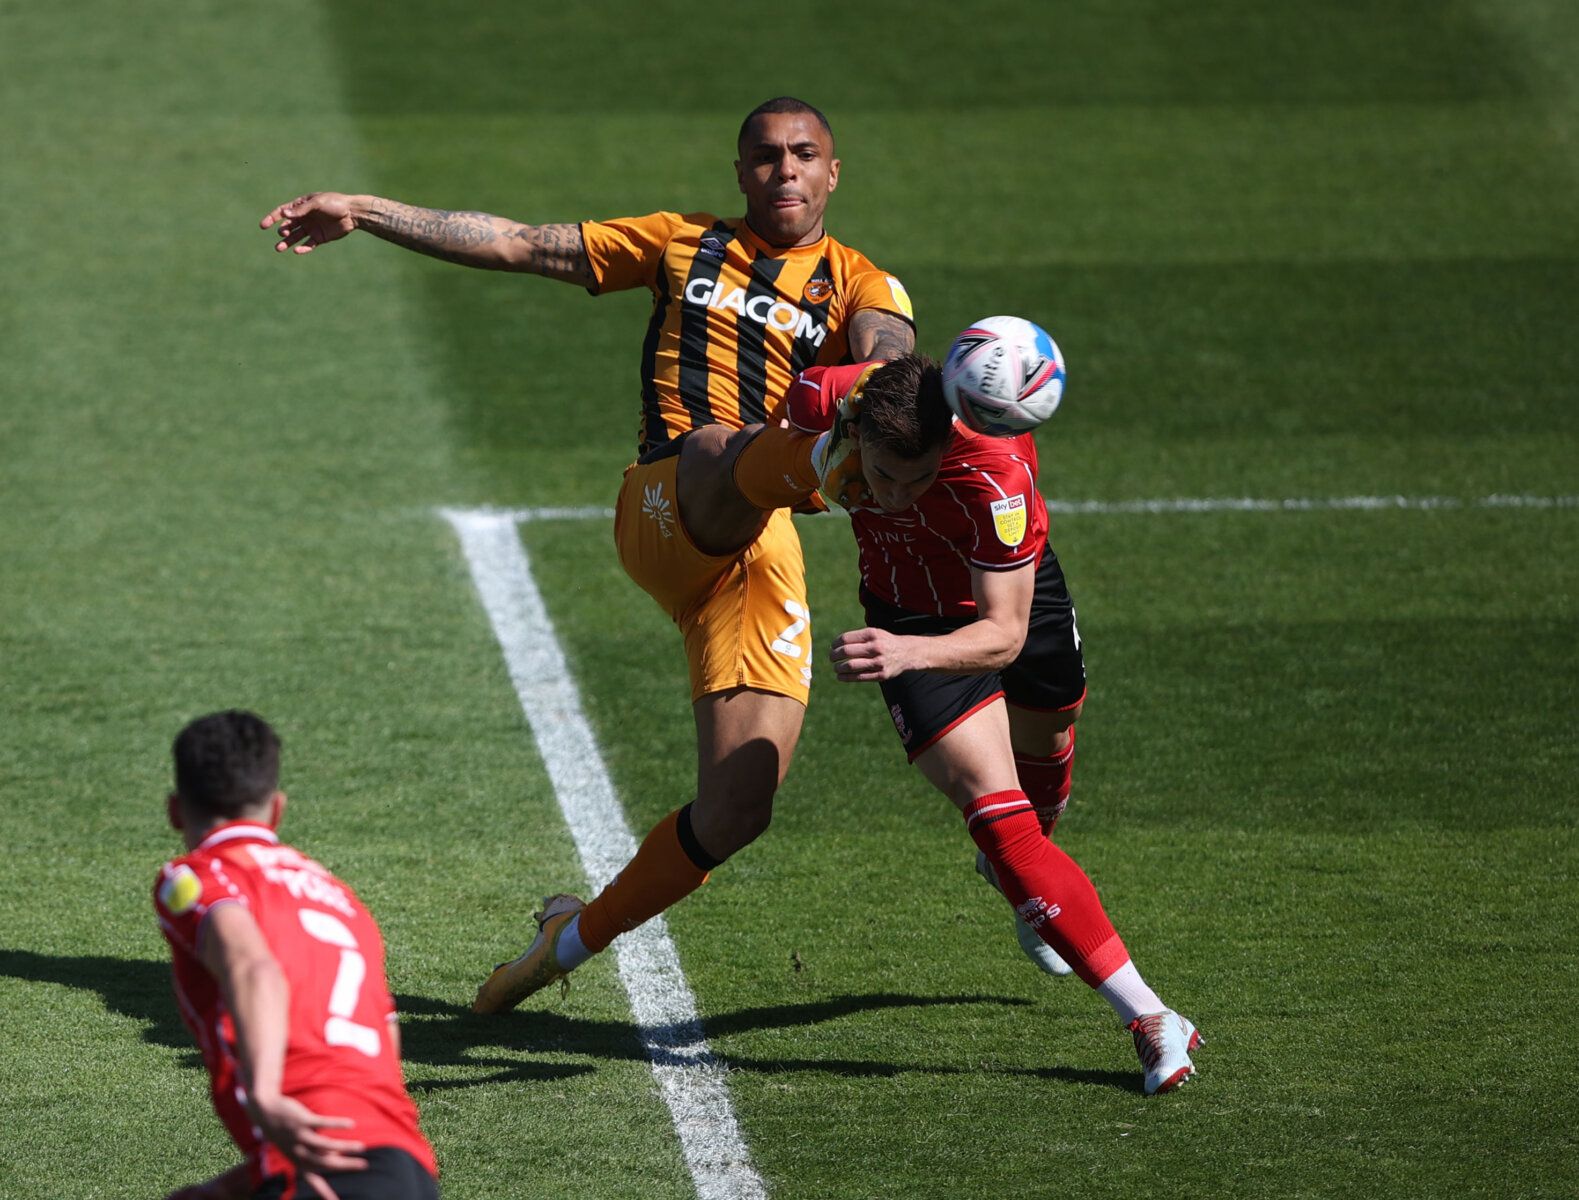 Soccer Football - League One - Lincoln City v Hull City - Sincil Bank, Lincoln, Britain - April 24, 2021 Hull City's Josh Magennis scores their first goal Action Images/Molly Darlington EDITORIAL USE ONLY. No use with unauthorized audio, video, data, fixture lists, club/league logos or 'live' services. Online in-match use limited to 75 images, no video emulation. No use in betting, games or single club /league/player publications.  Please contact your account representative for further details.